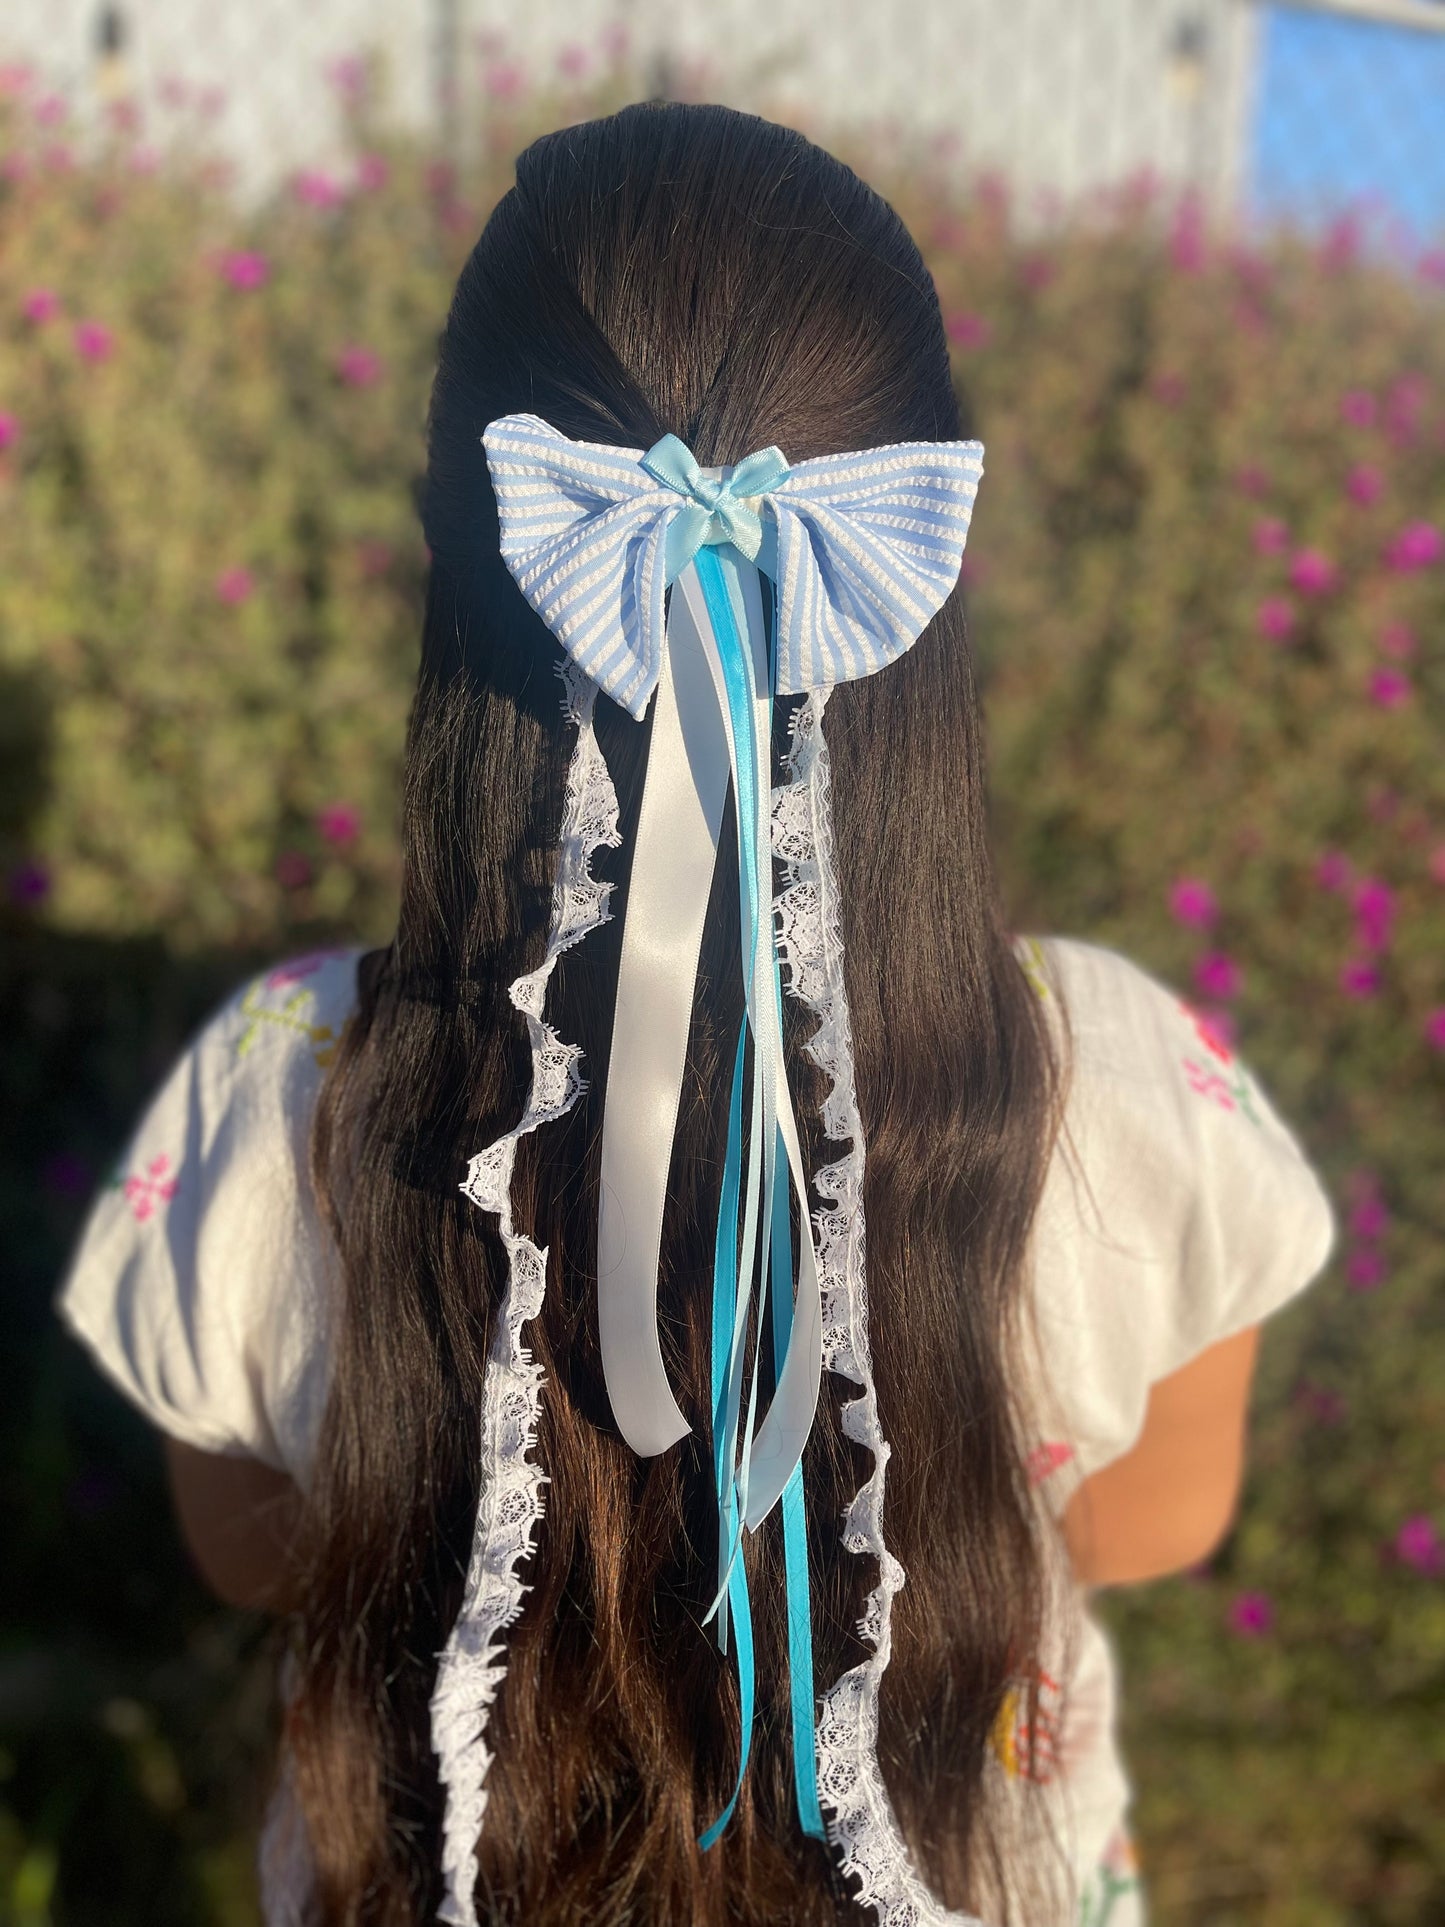 Stripped blue and white bow